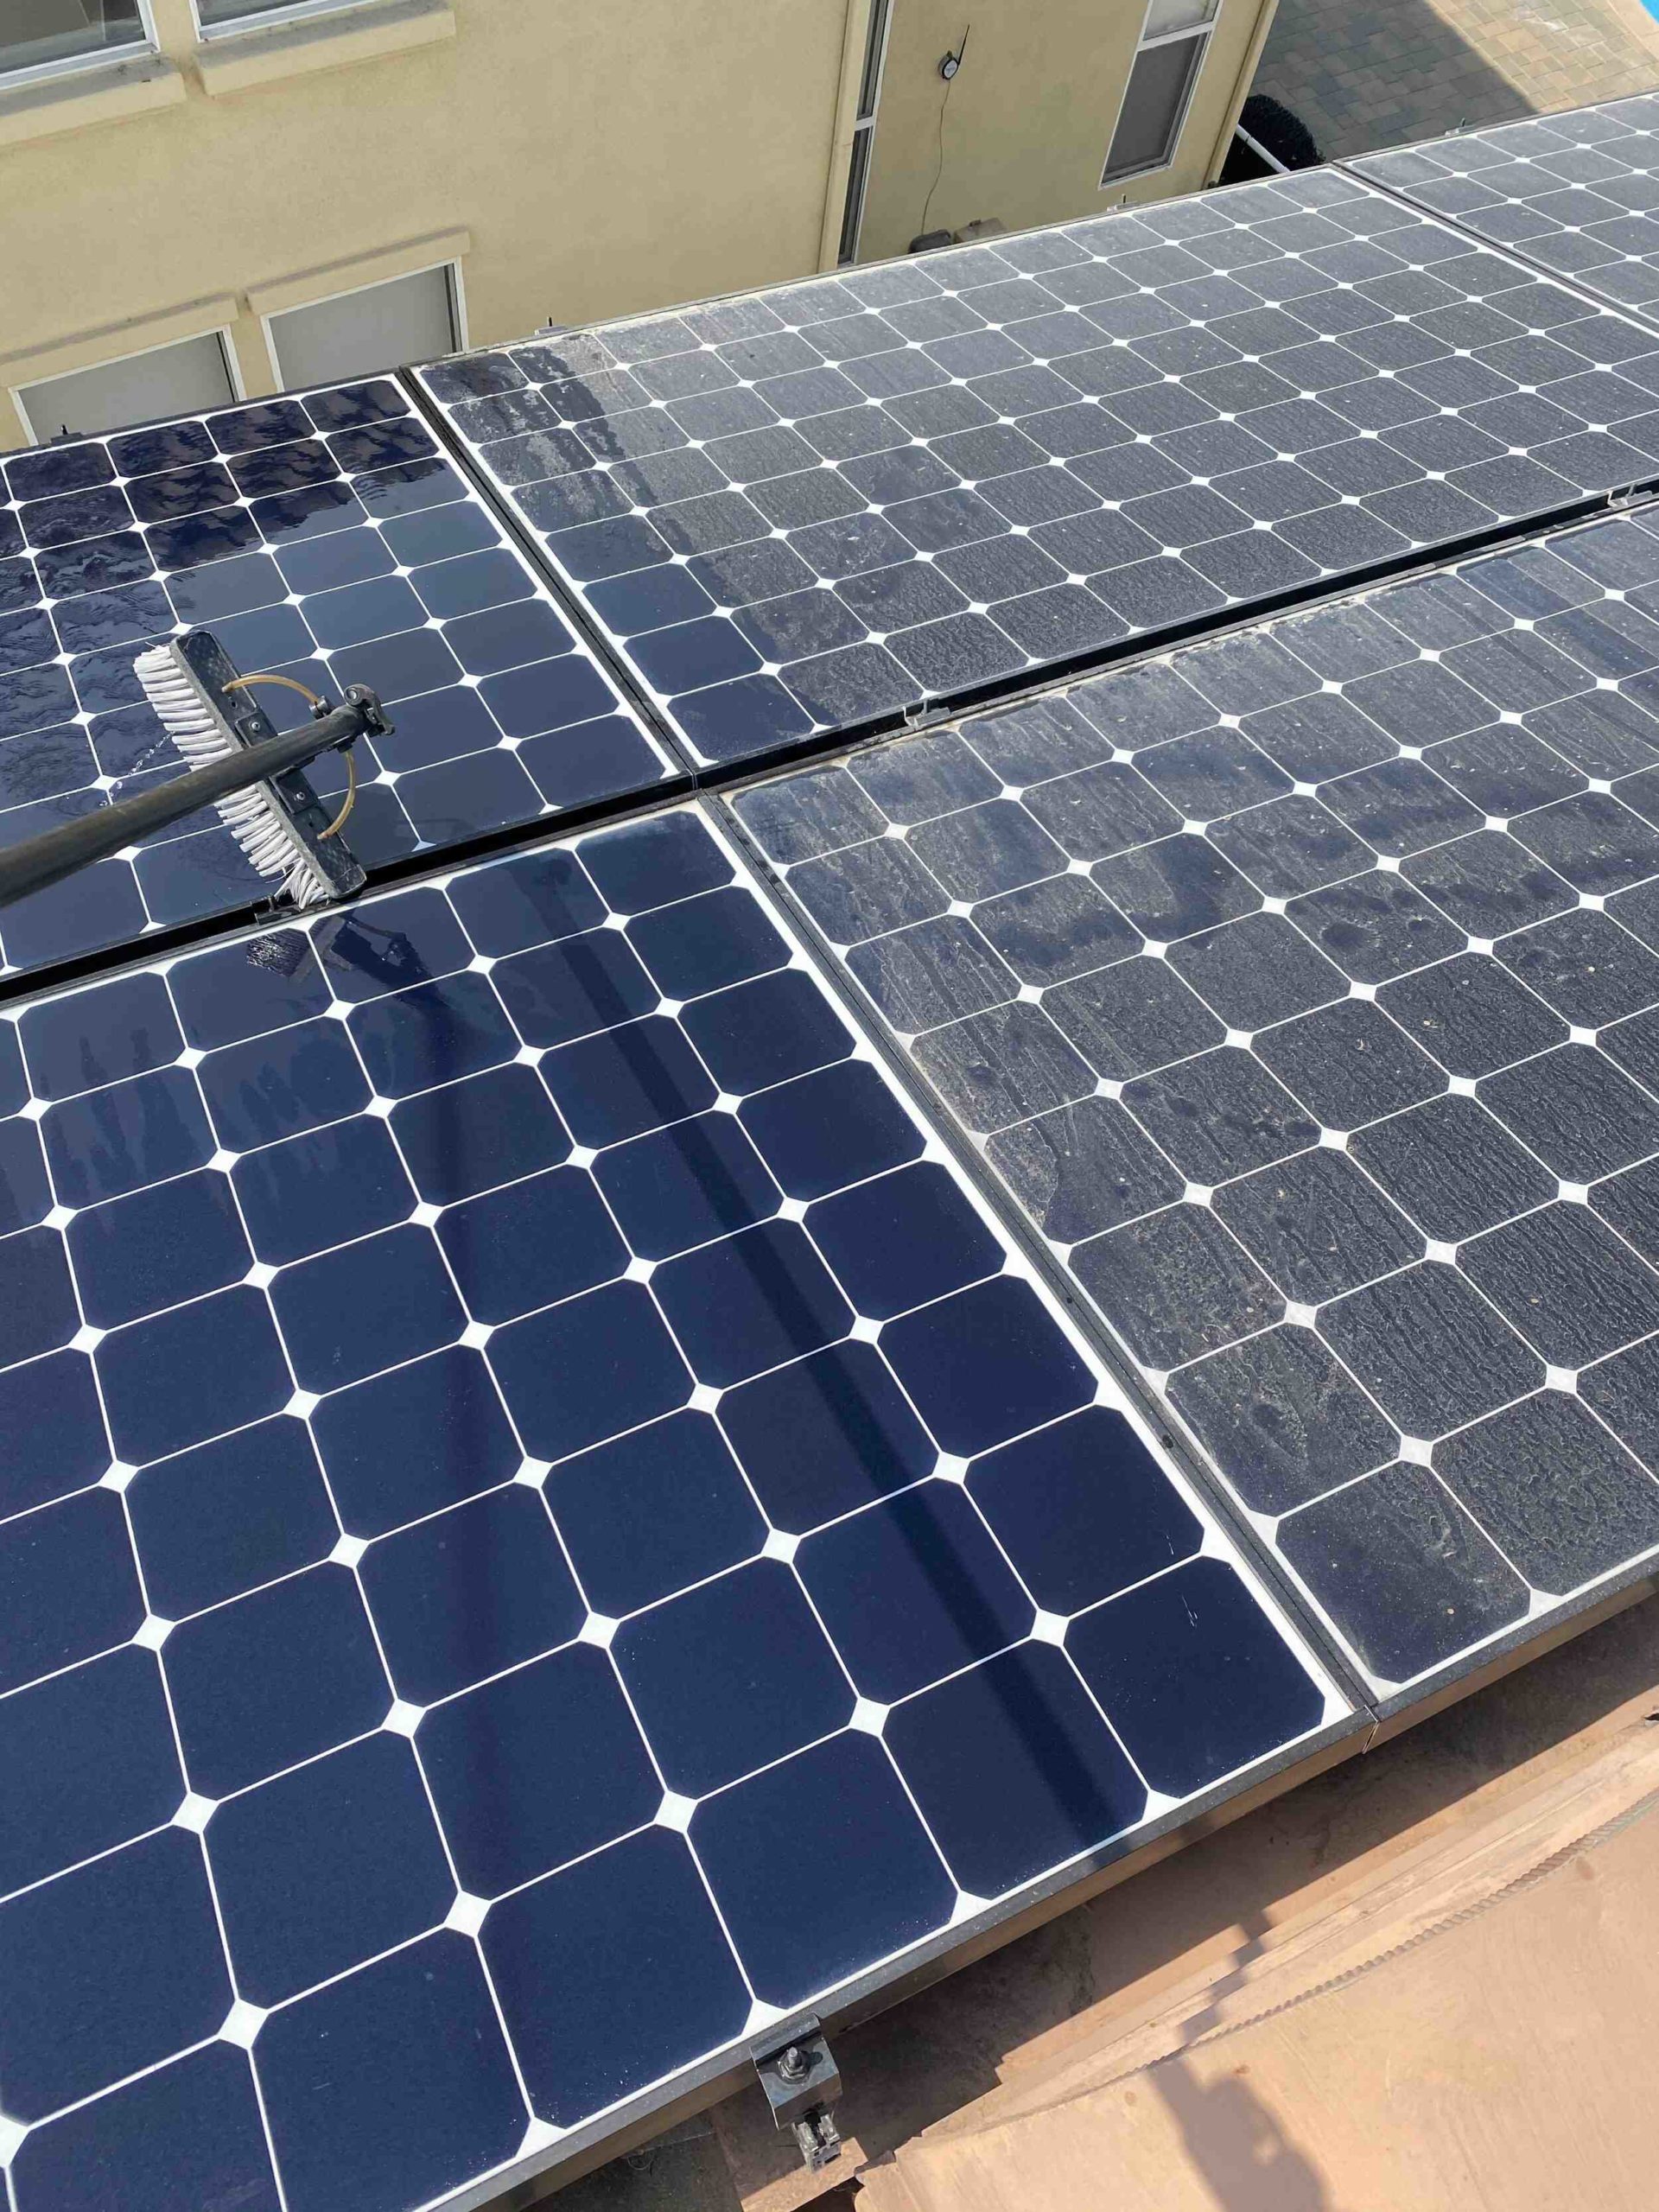 Is it worth getting solar installed?